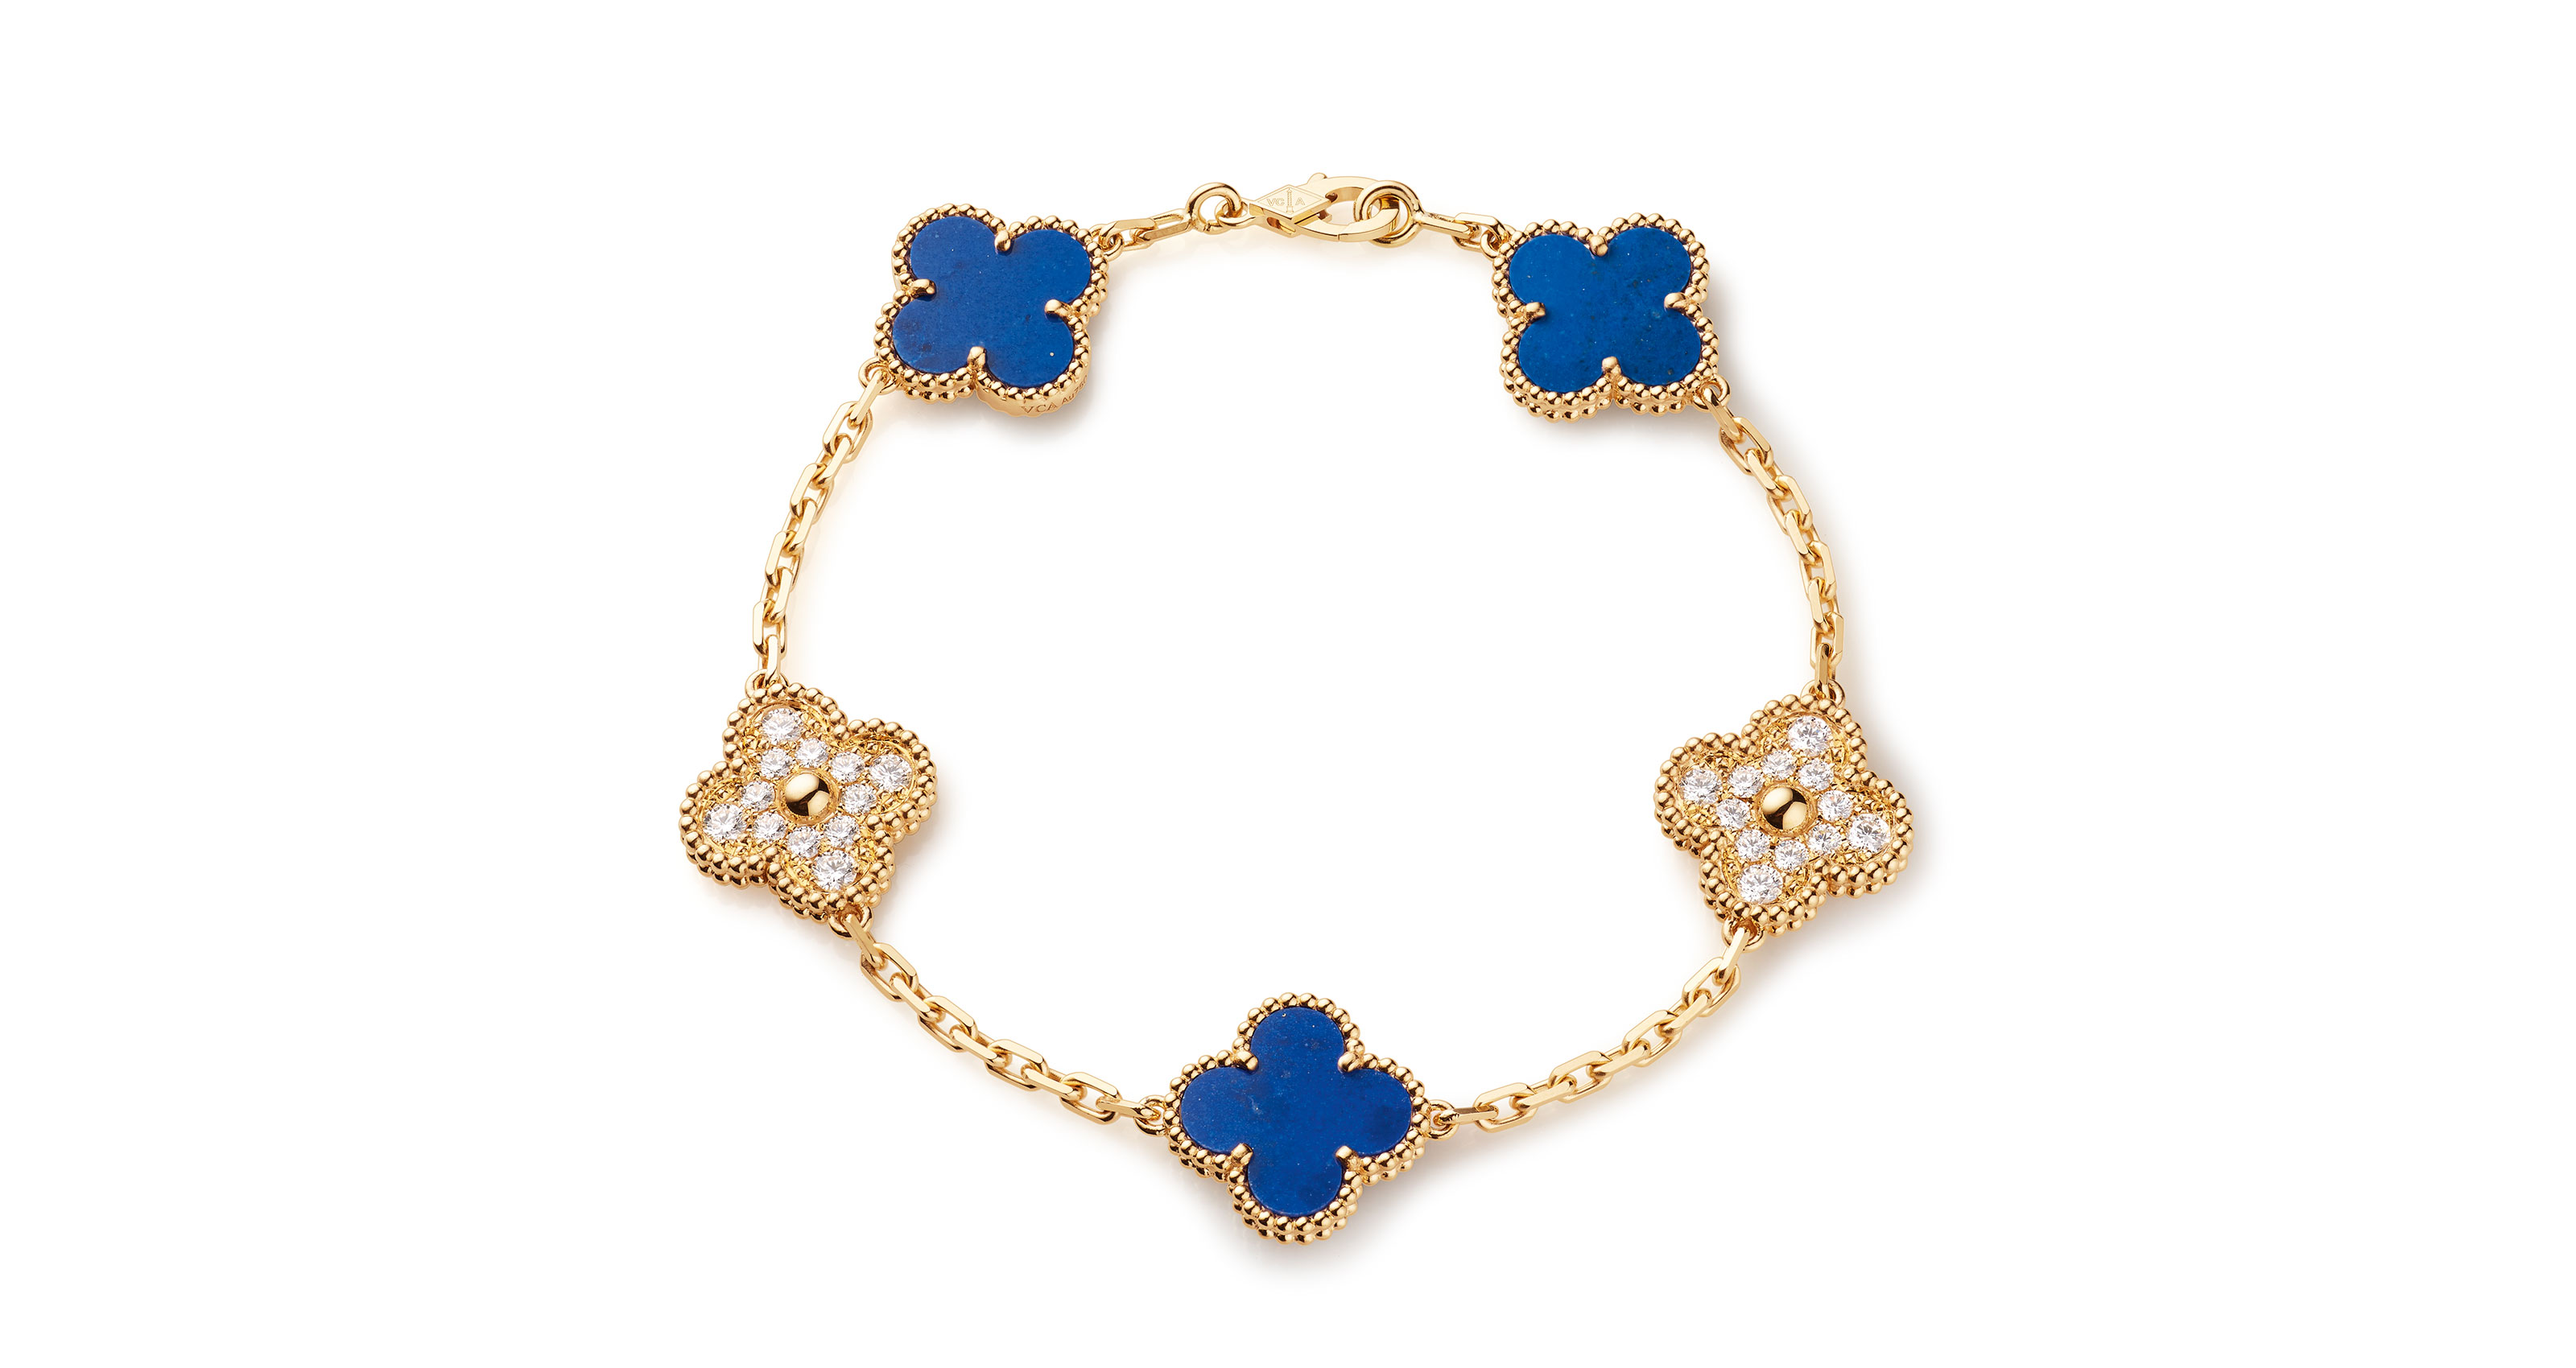 CARTIER 18k Yellow Gold Clover Necklace 63007 | FASHIONPHILE